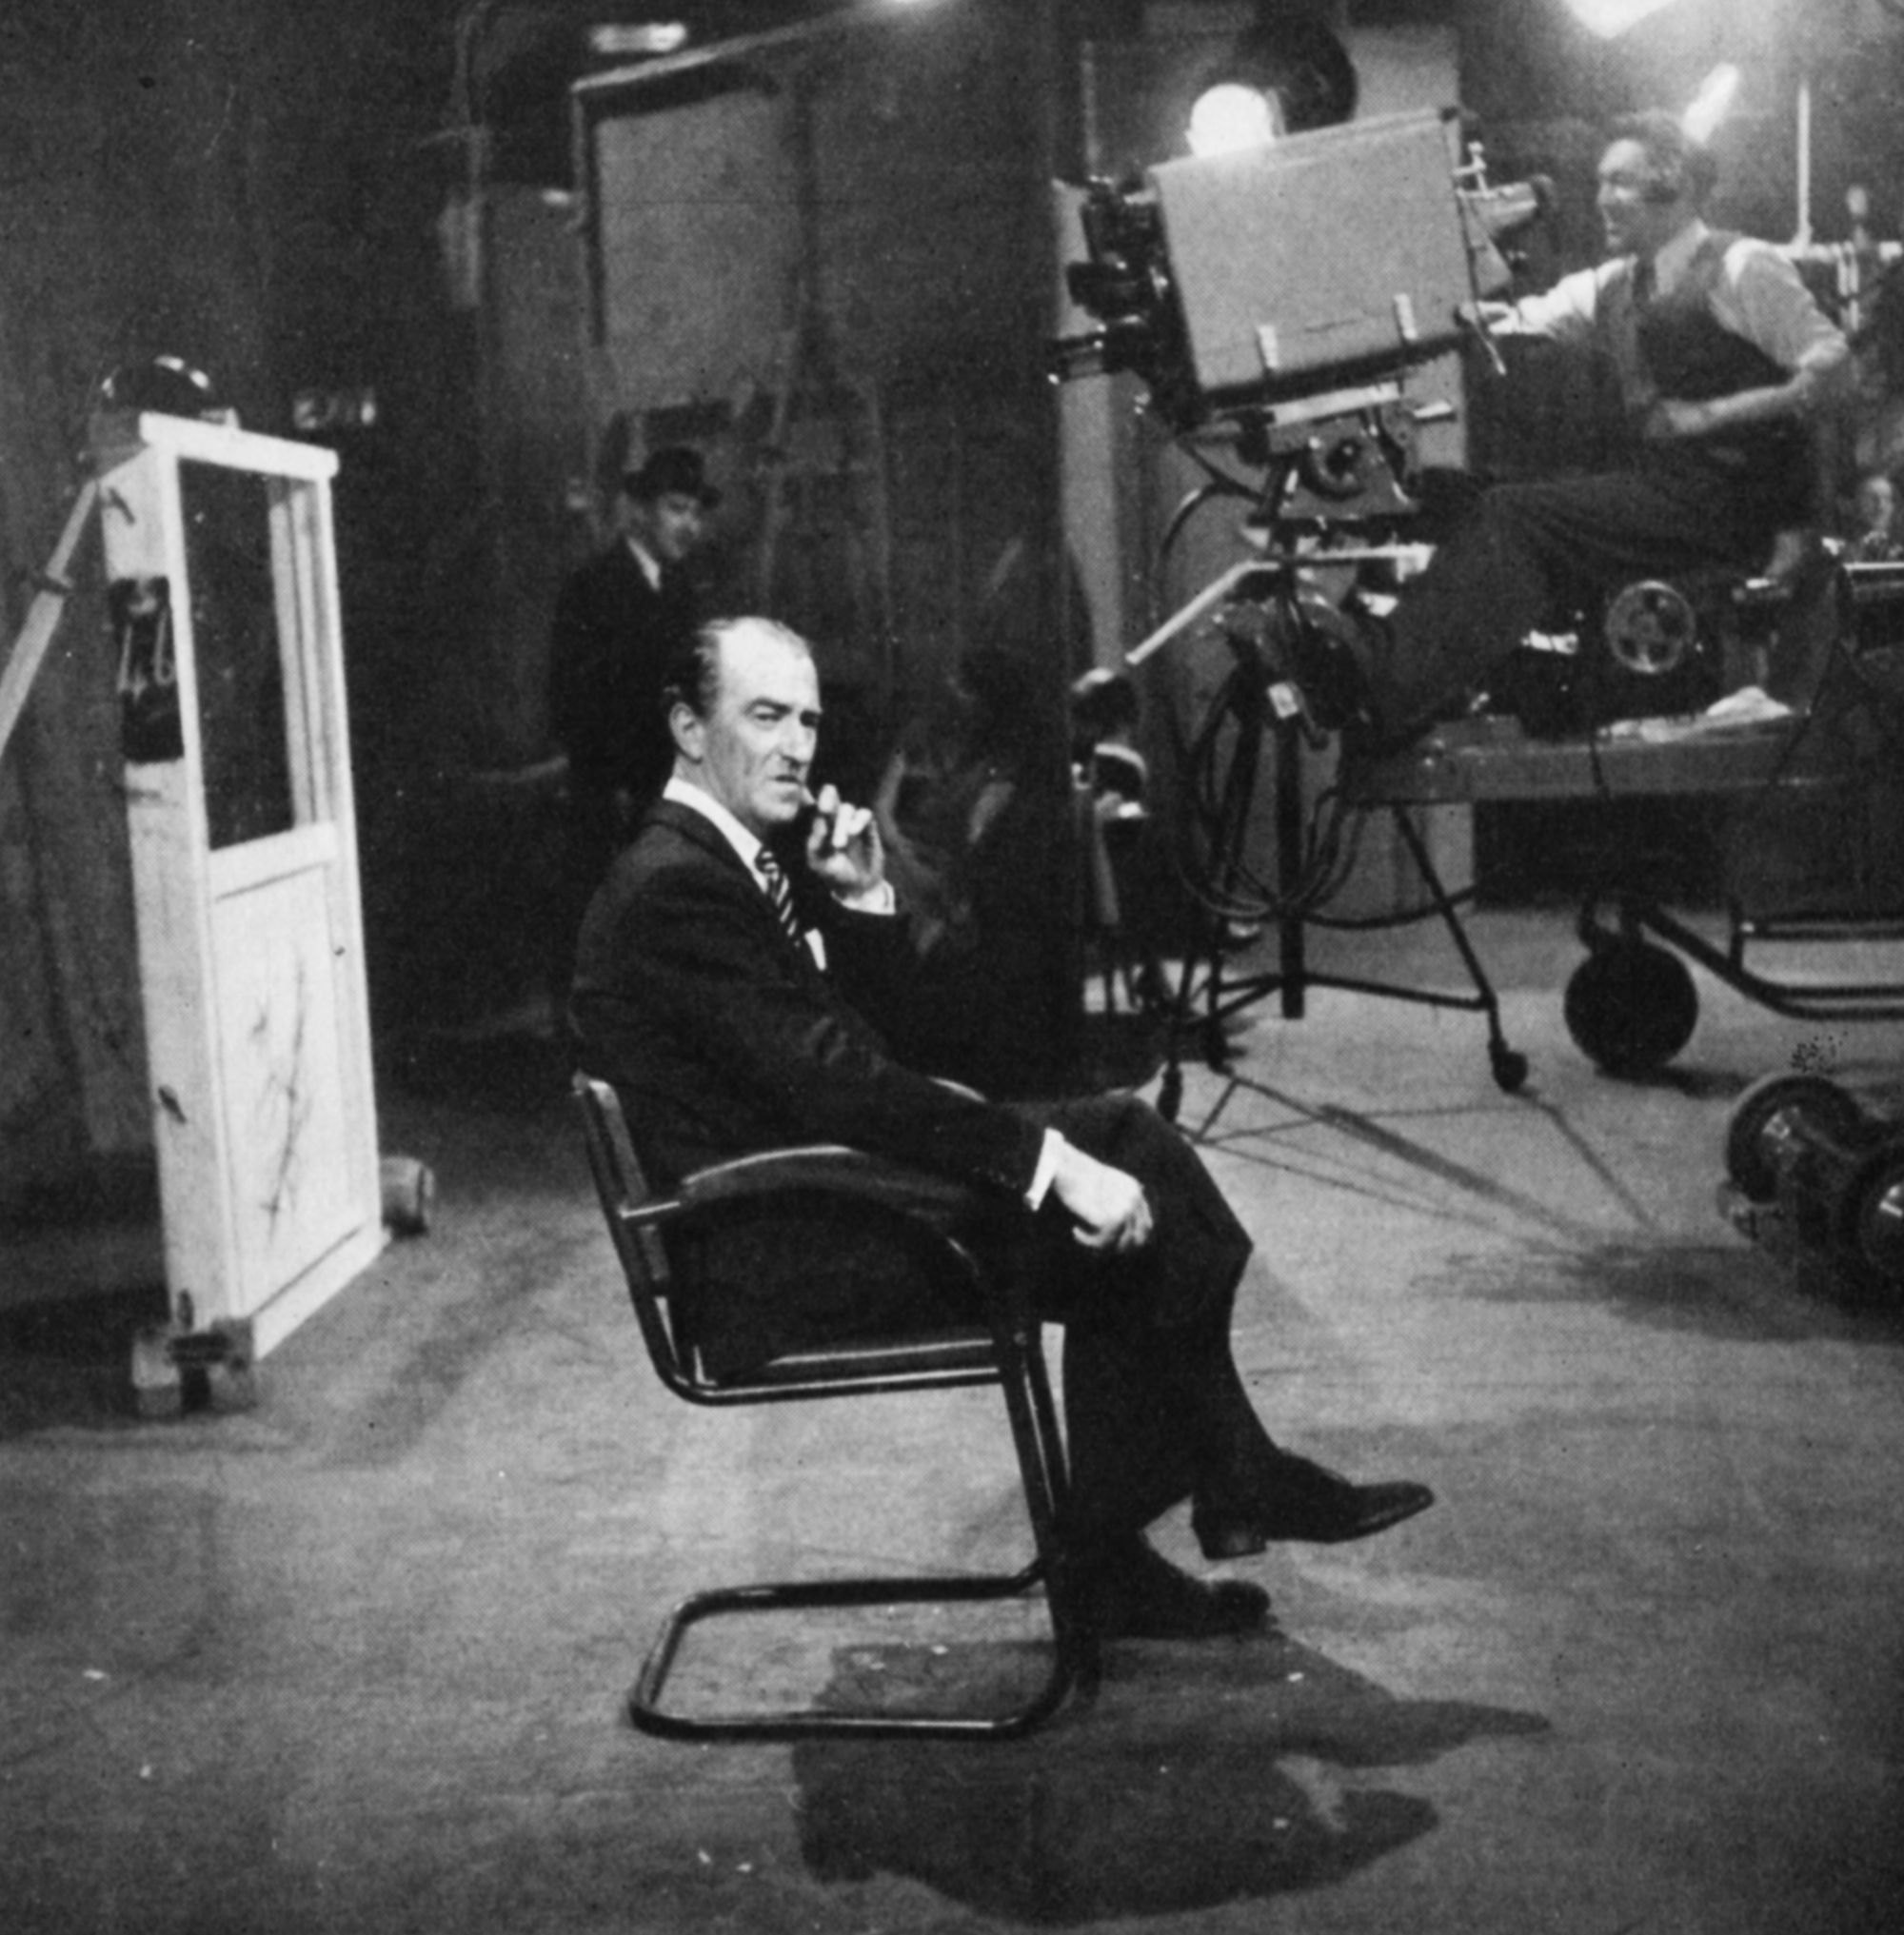 Dick Bentley sits in a chair at the back of a busy studio